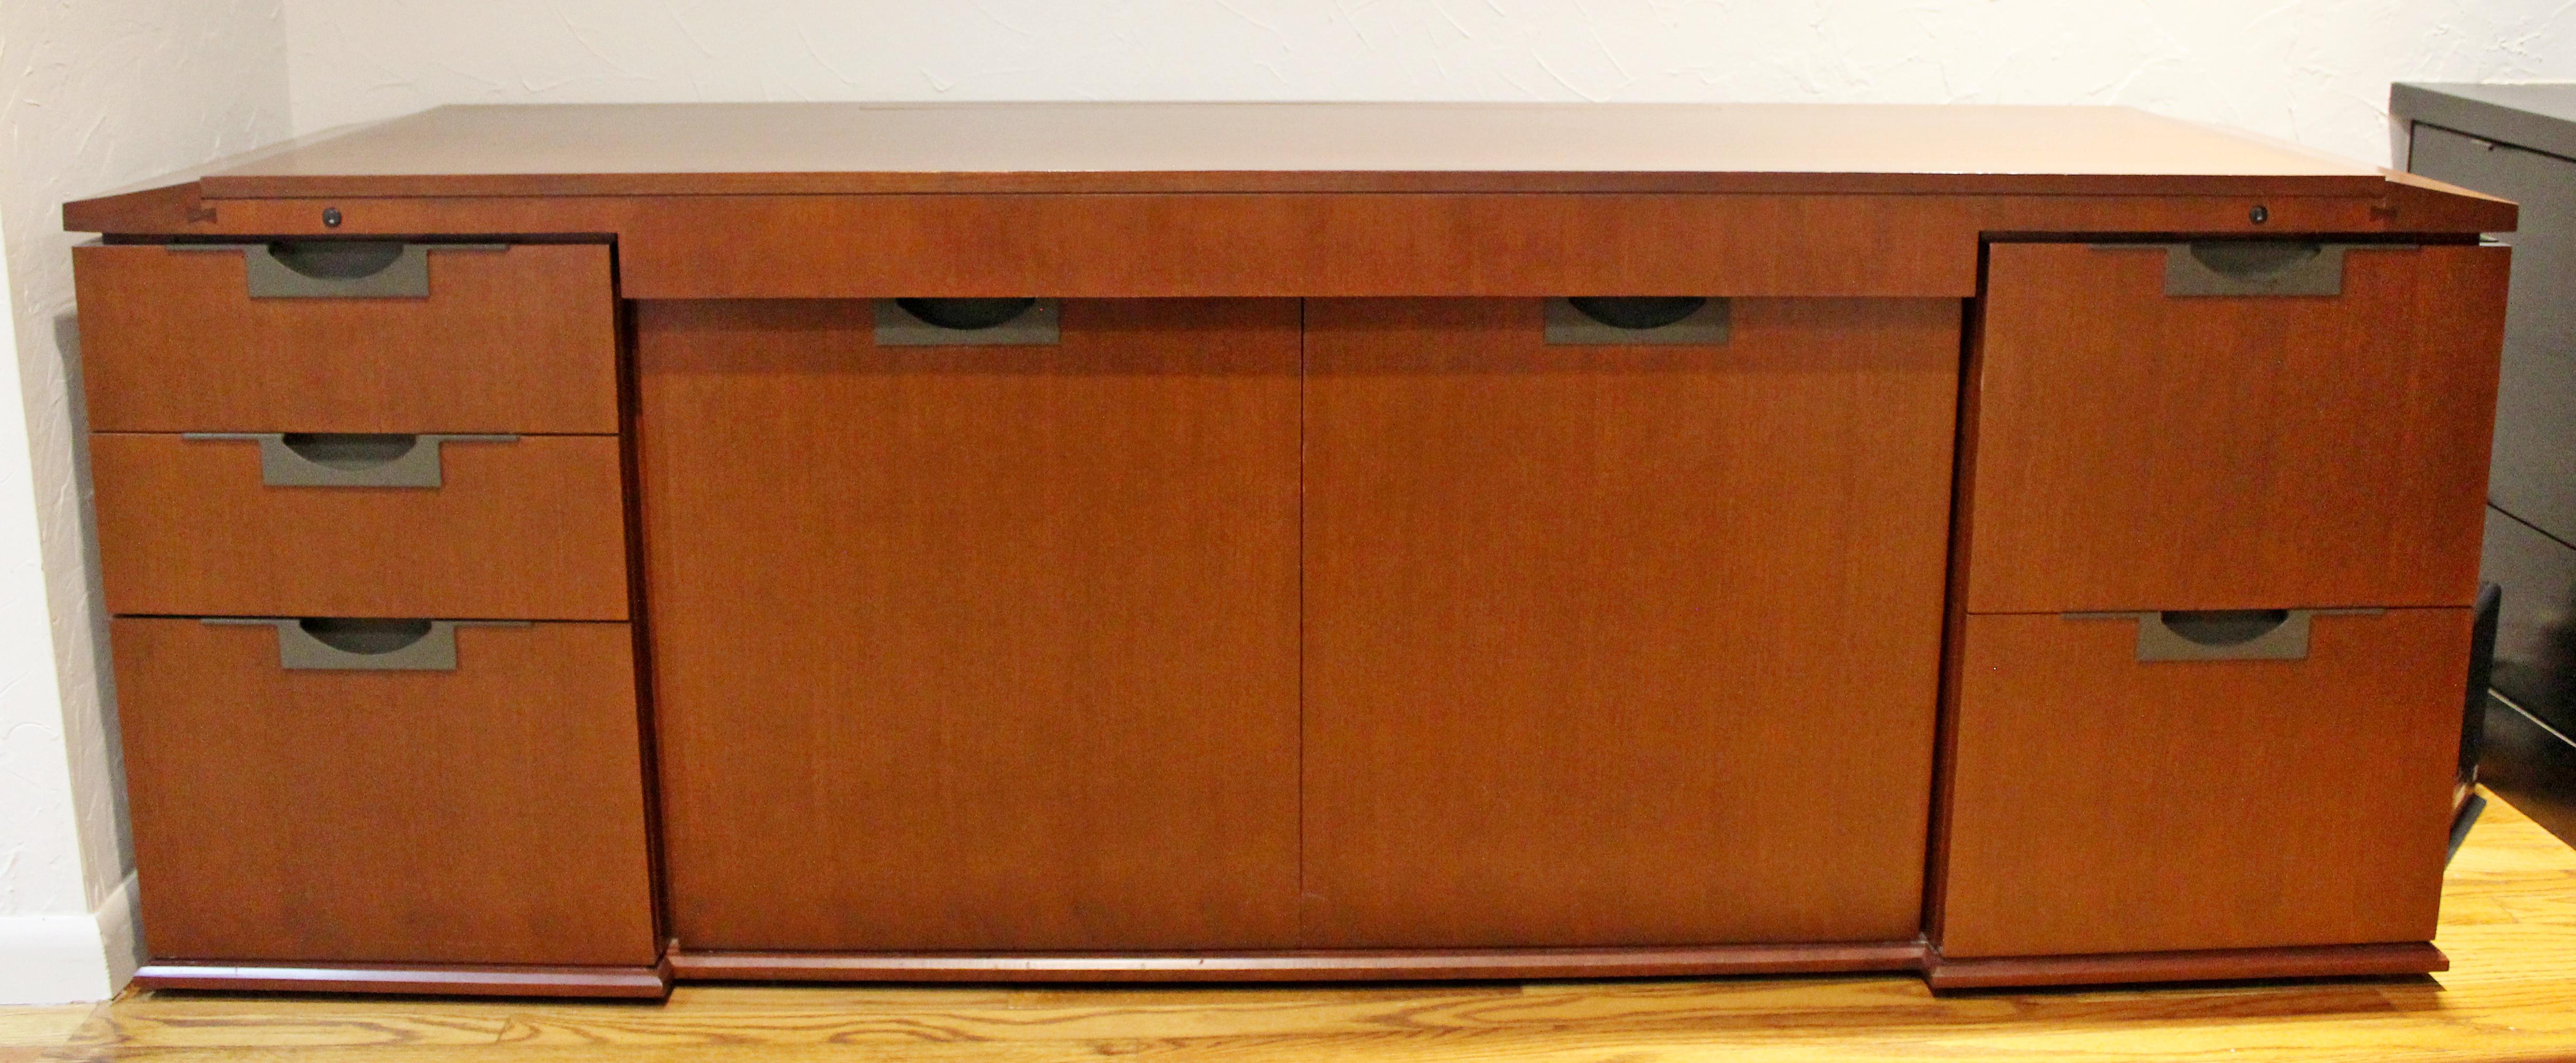 Arts & Crafts Cherry Office Sideboard Credenza Cabinet Frank Lloyd Wright Style In Distressed Condition In Keego Harbor, MI